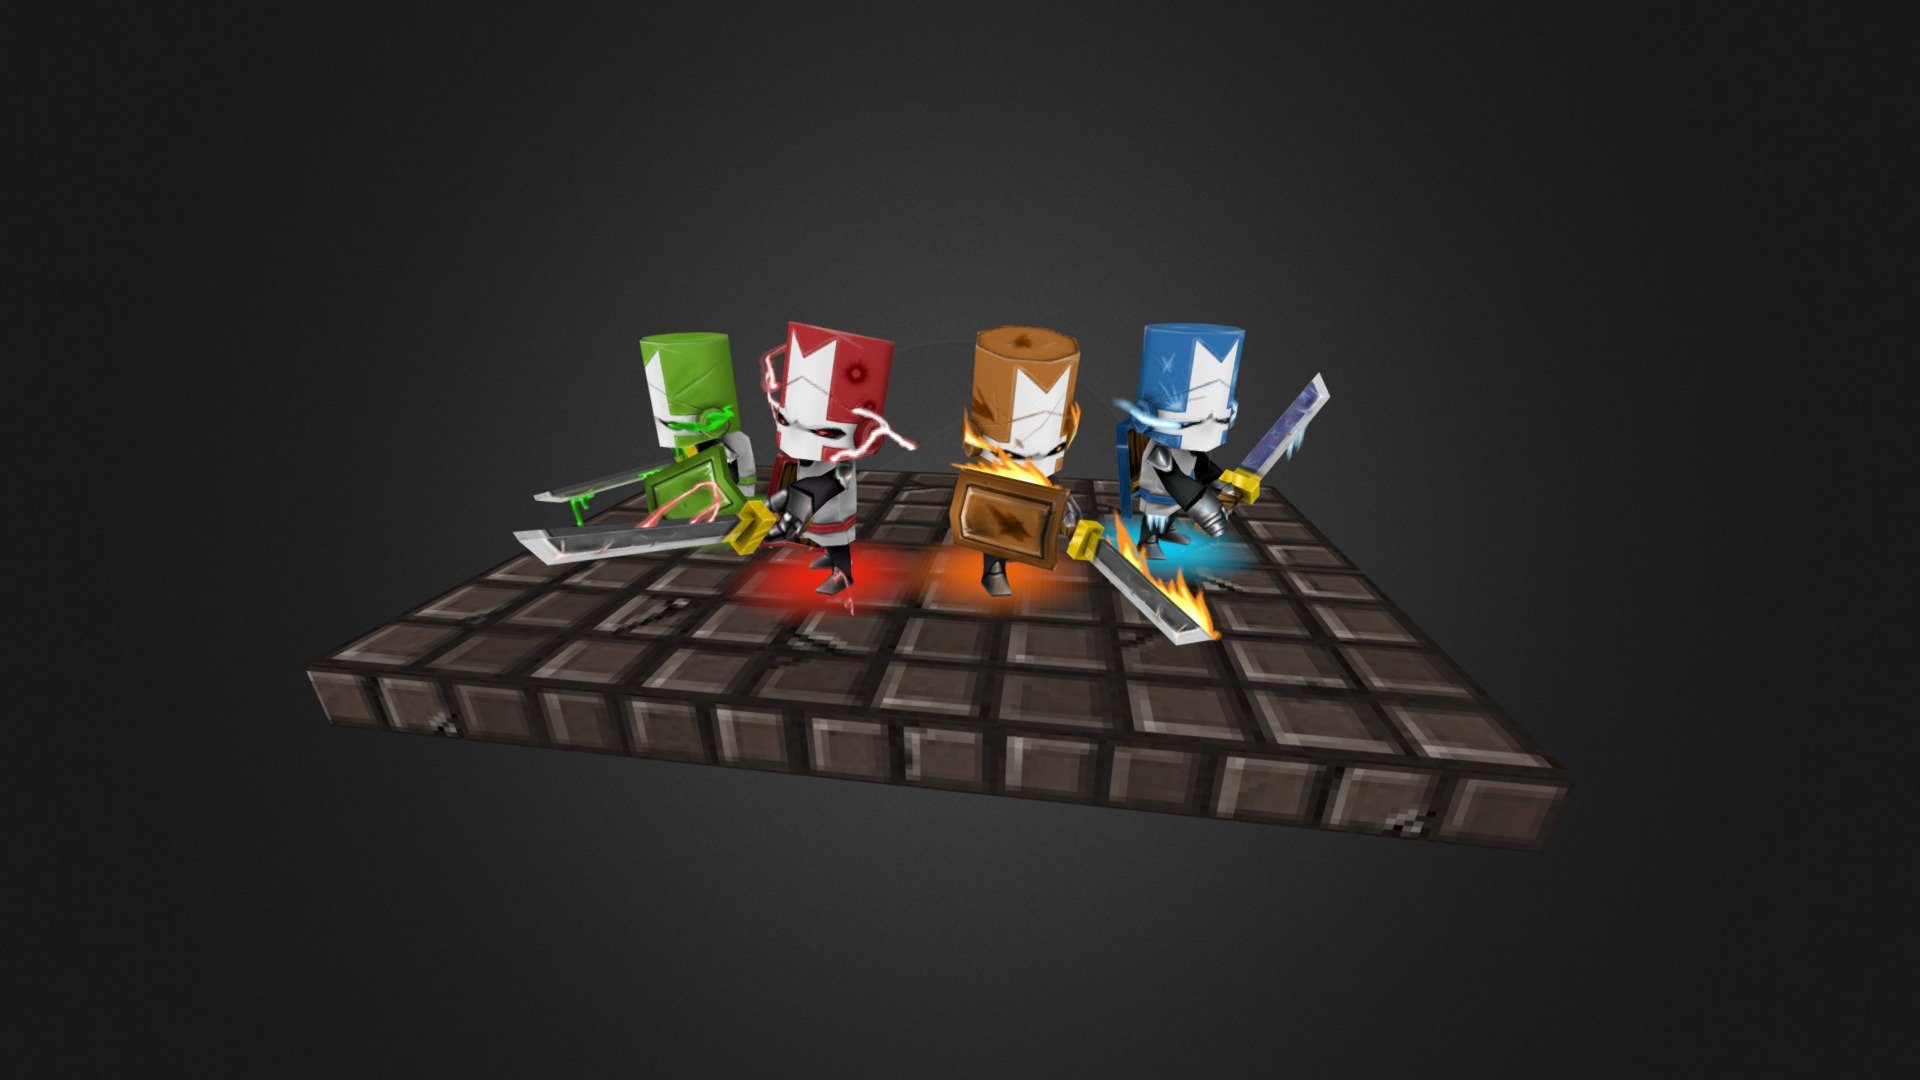 Castle Crashers low poly fan art. Each knight is 576 Tris and 256x256 texture. cg.danzo@gmail.com - pose_group.zip - 3D model by danzo 3d model